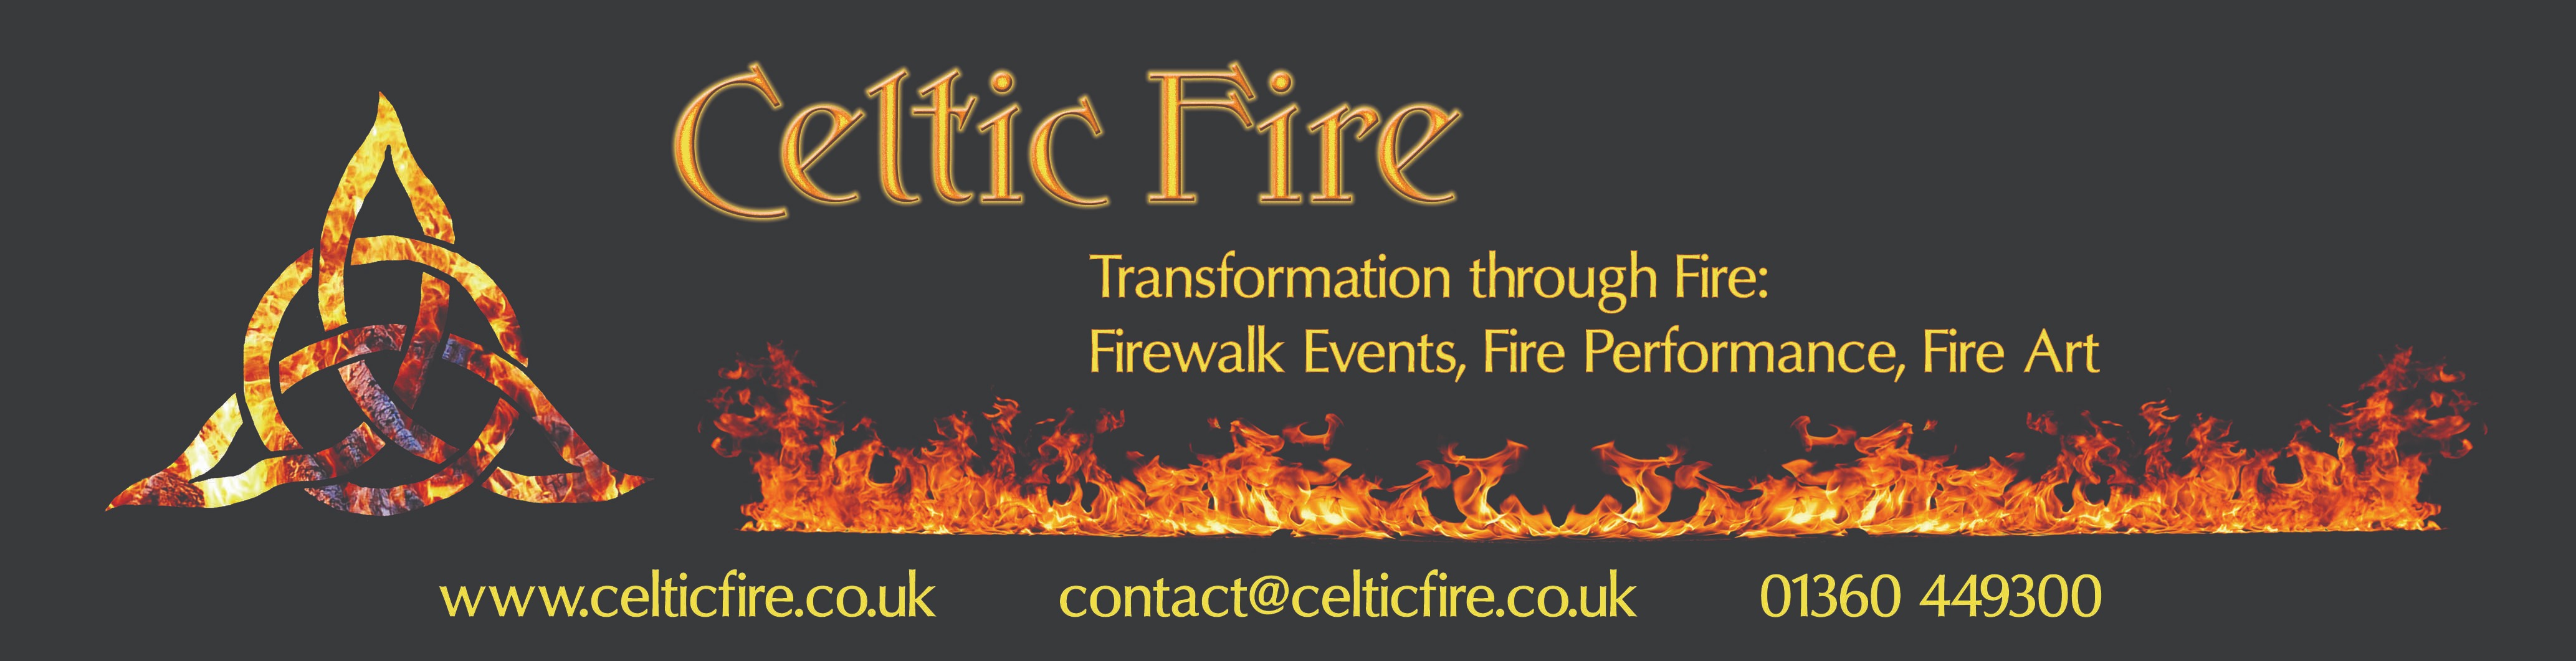 Celtic Fire Limited